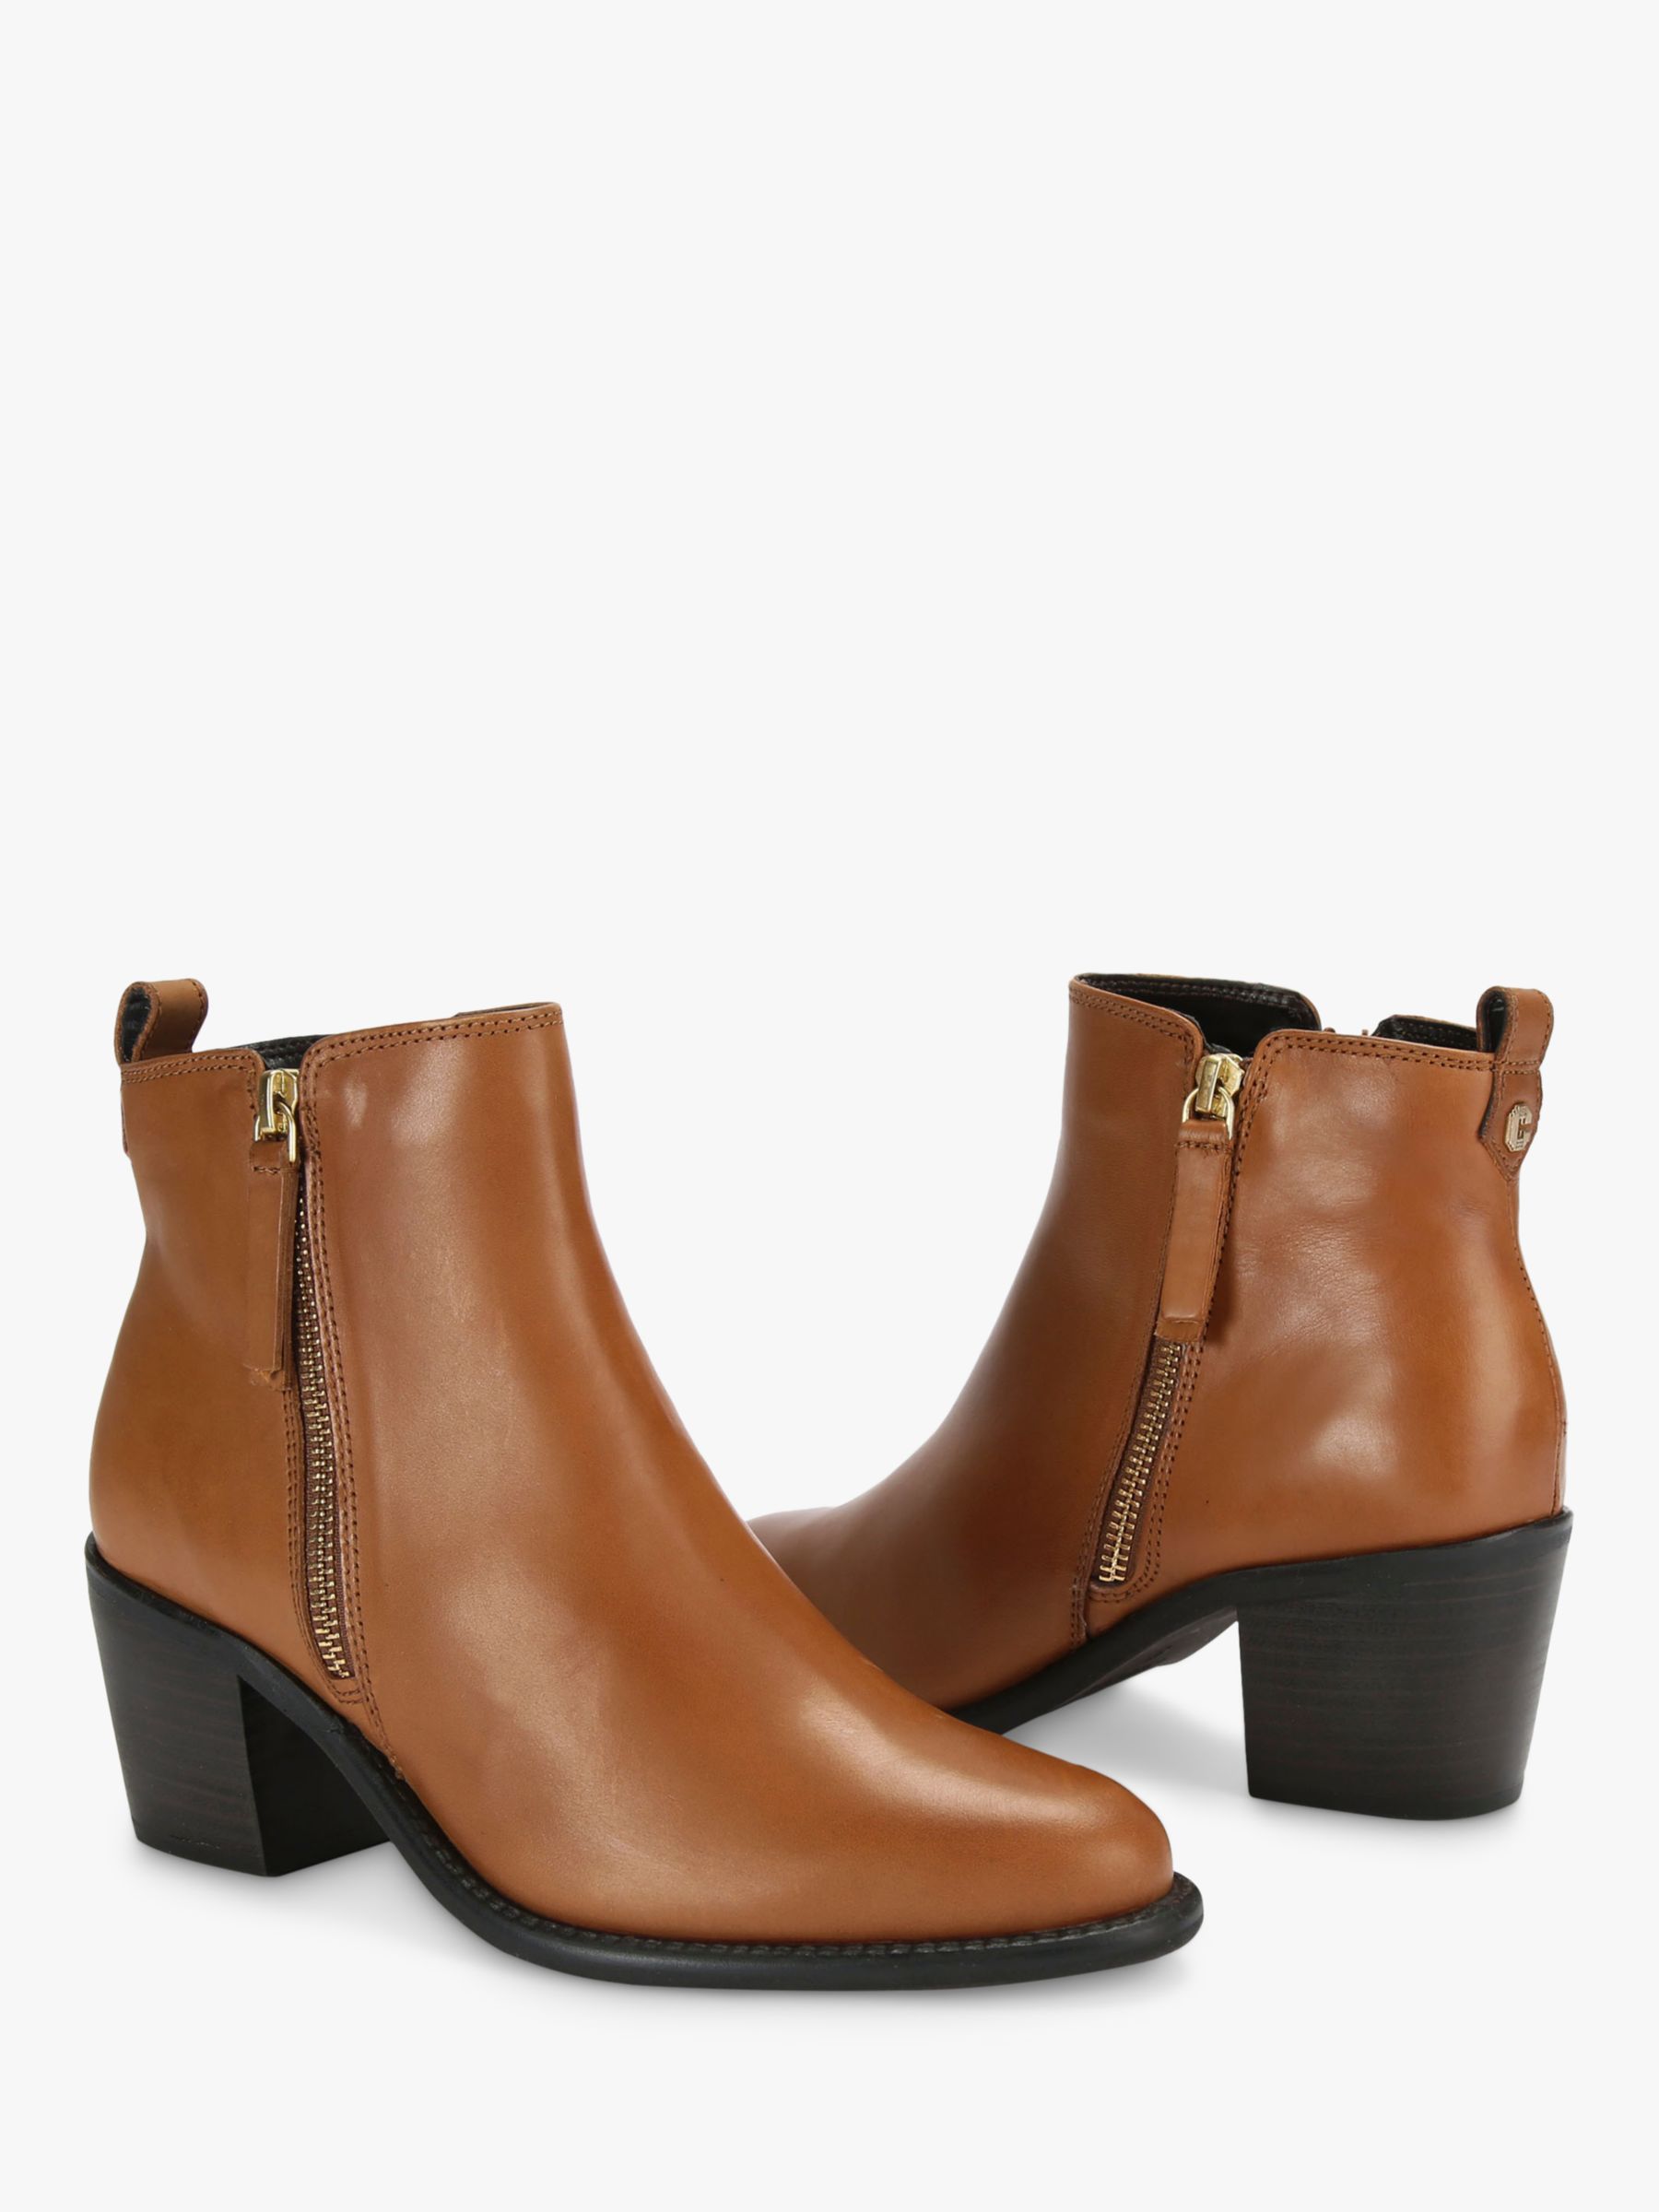 Carvela Secil Leather Ankle Boots, Tan, 3